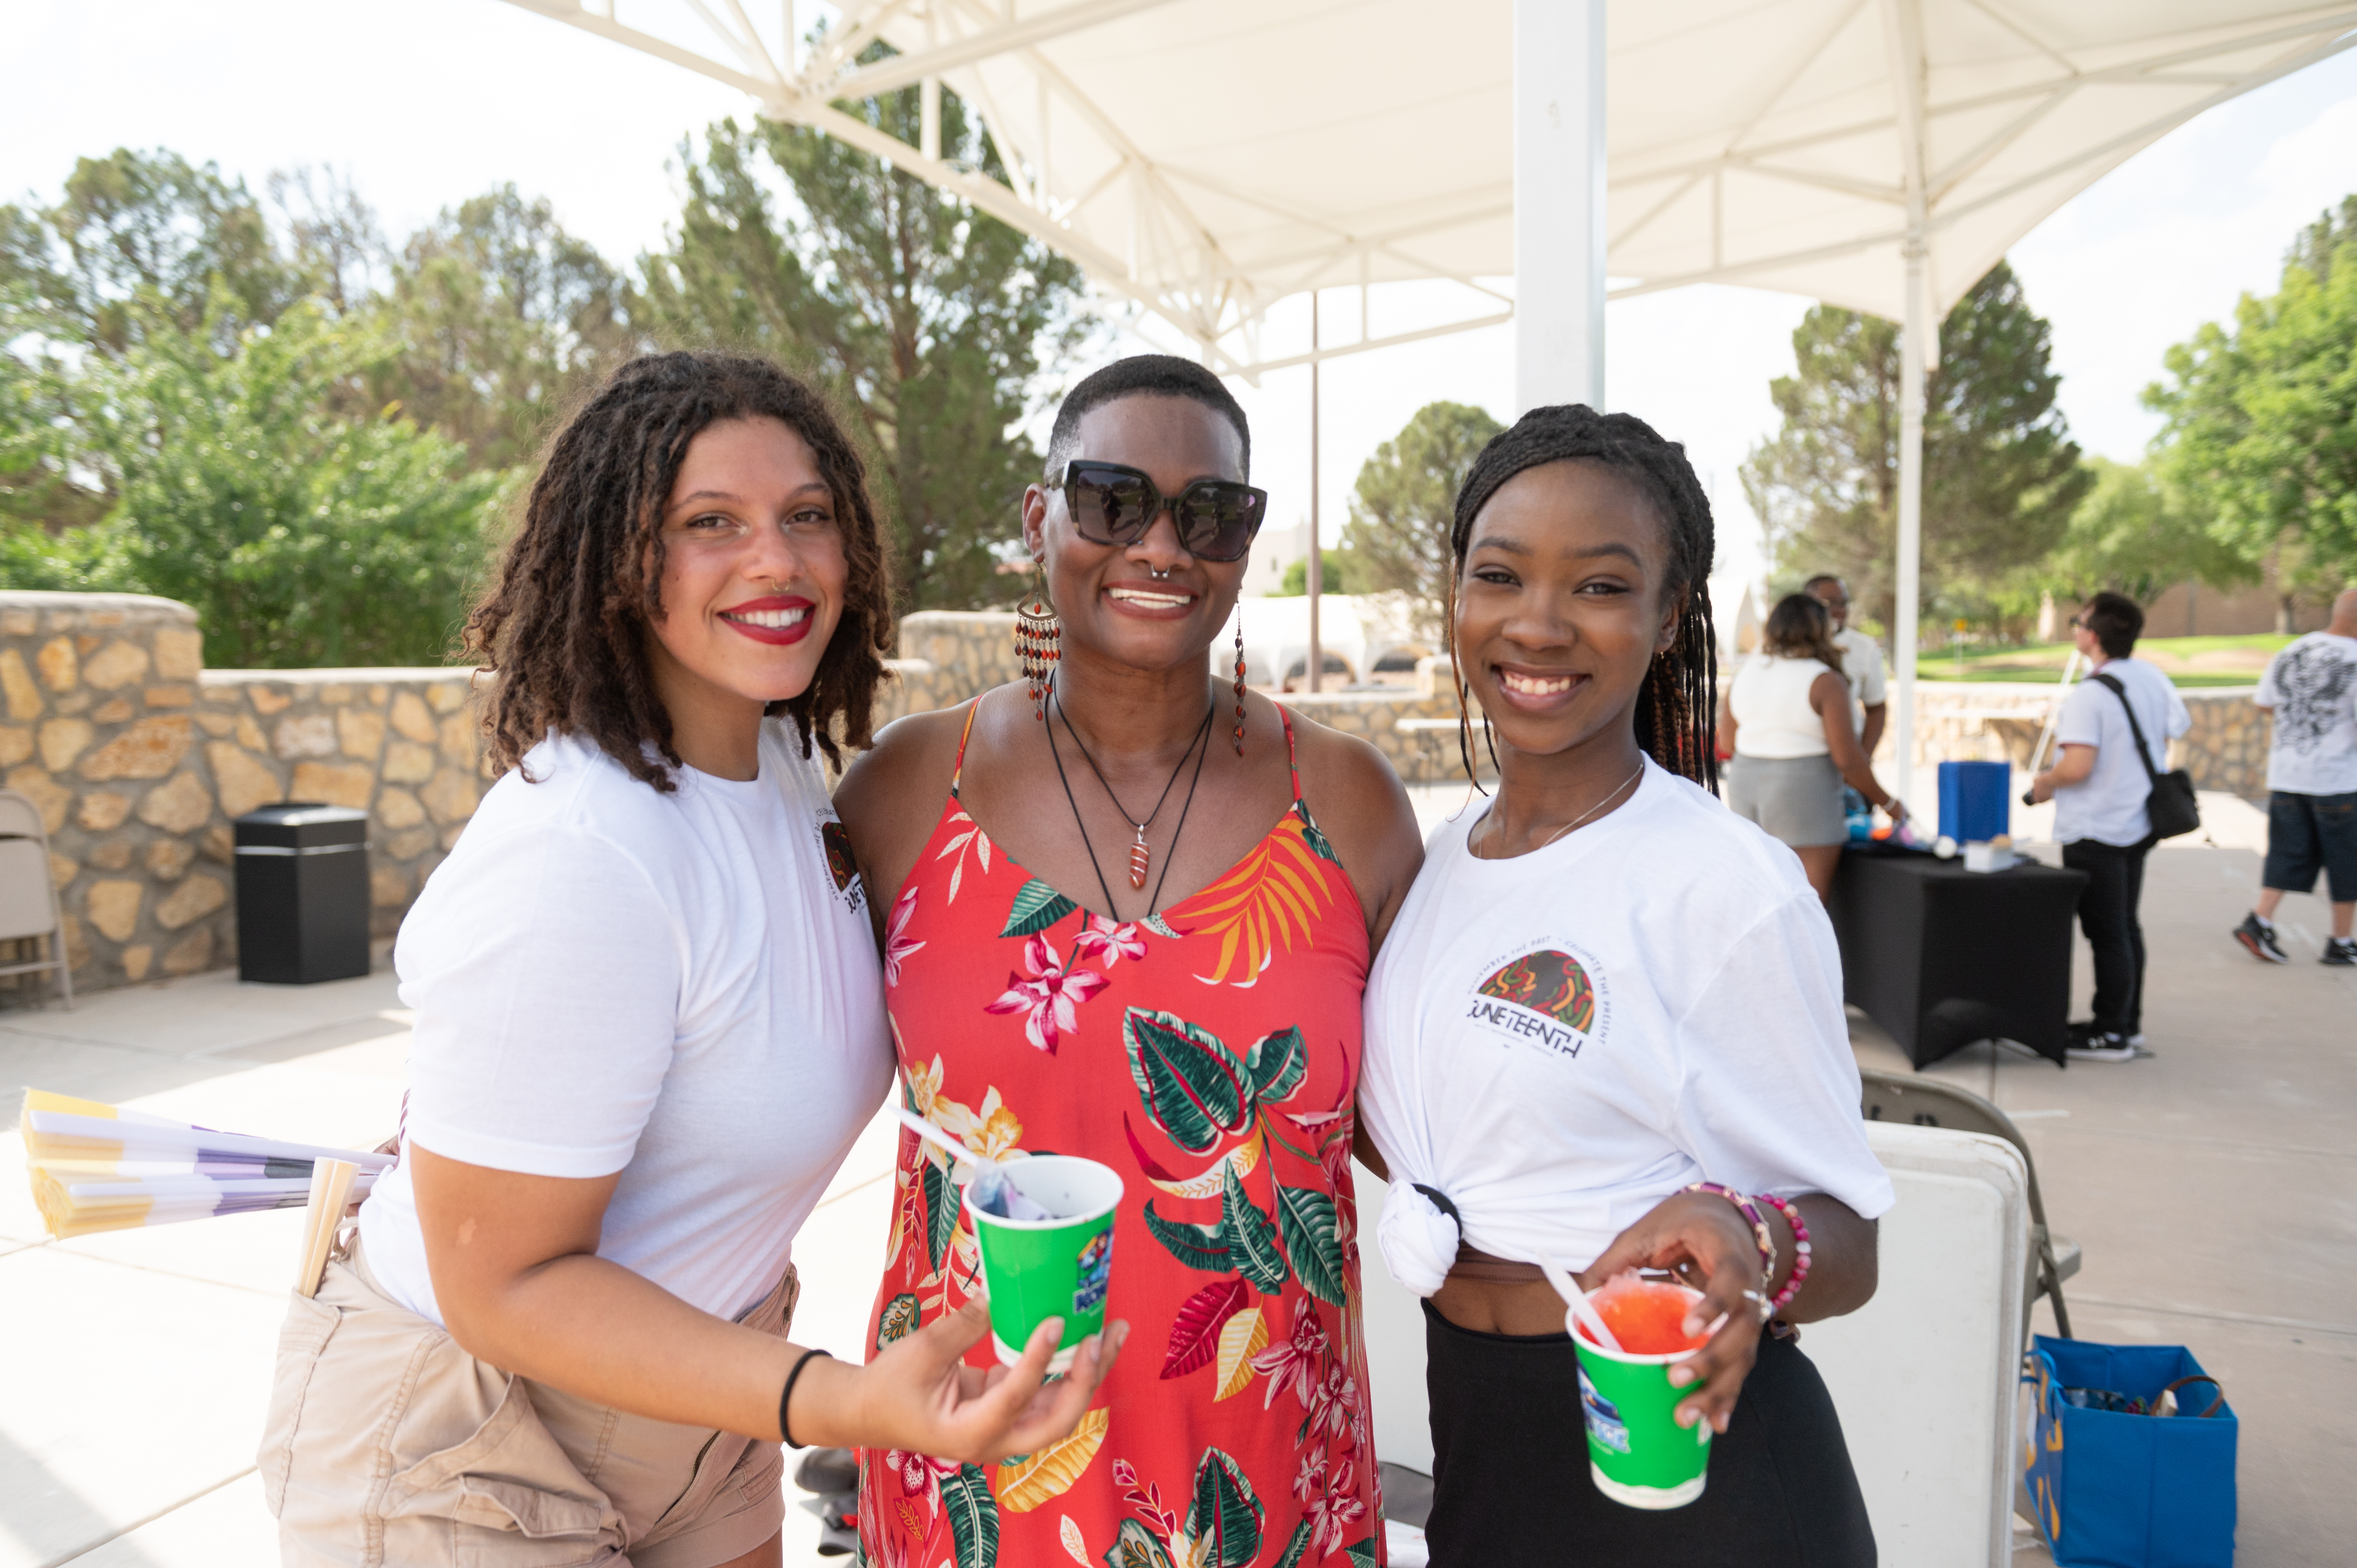 The image depicts three people standing closely together and smiling at an outdoor event. The person in the middle is wearing a red floral dress, black sunglasses, and red earrings, and has a short haircut. The person on the left is wearing a white t-shirt and beige shorts, holding a green cup and clutching colorful items under their arm. They have curly hair and are smiling brightly with red lipstick. The person on the right is also wearing a white t-shirt with a tied front and is holding a colorful icy treat in a green cup. They have long braids and are smiling warmly. In the background, there is a stone wall, trees, and other people mingling under a white canopy structure.